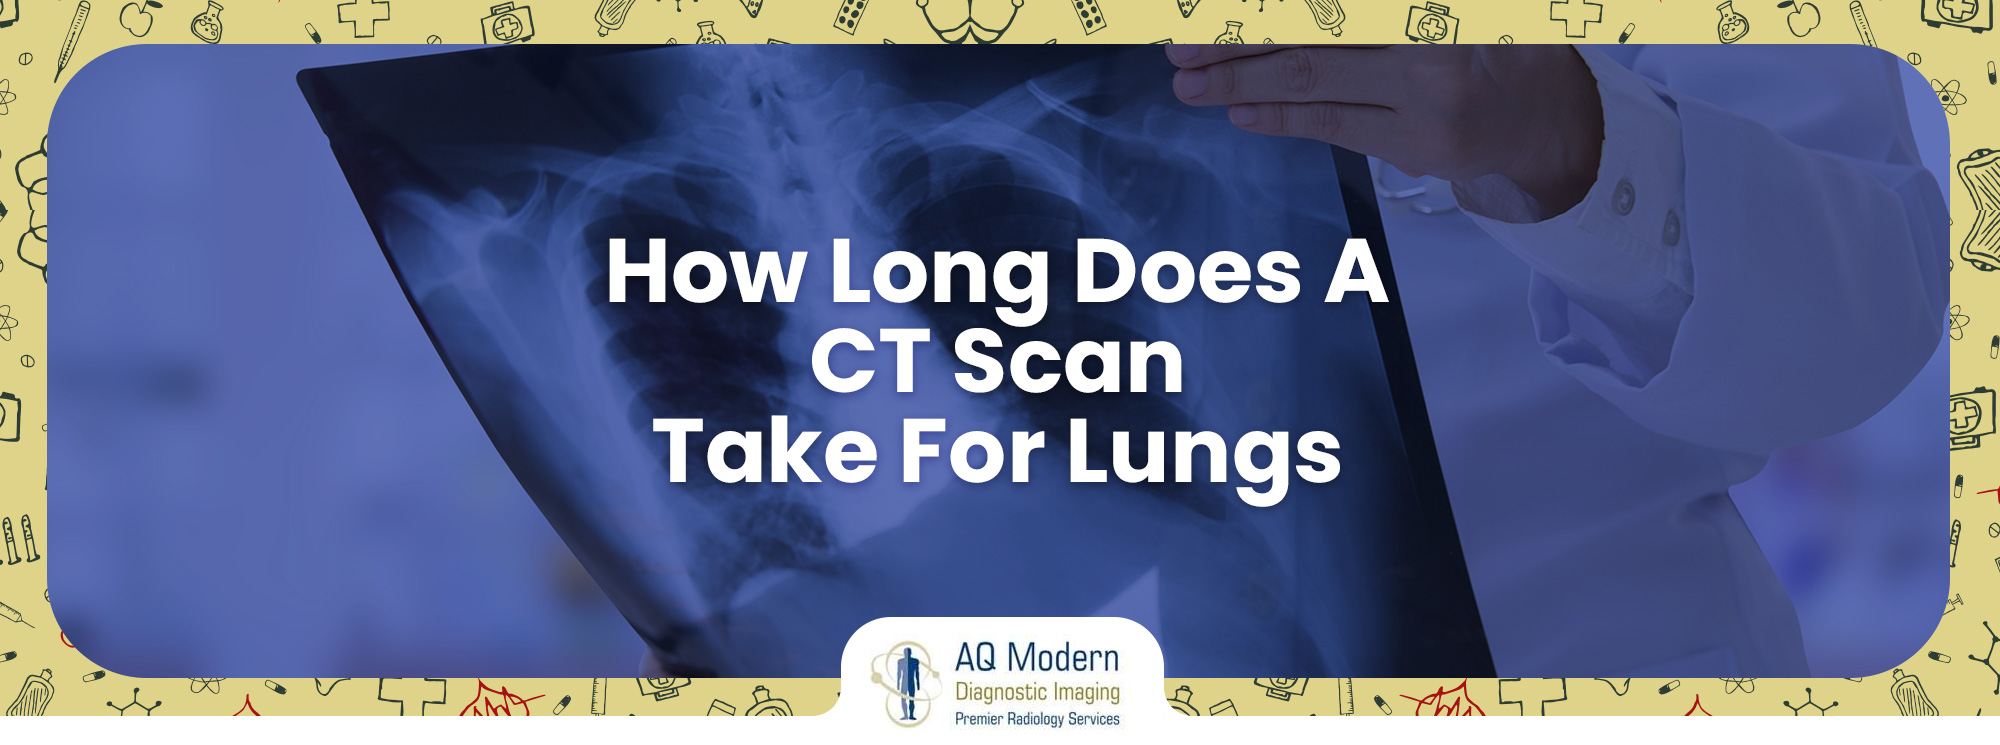 How Long Does a CT Scan Take For Lungs?